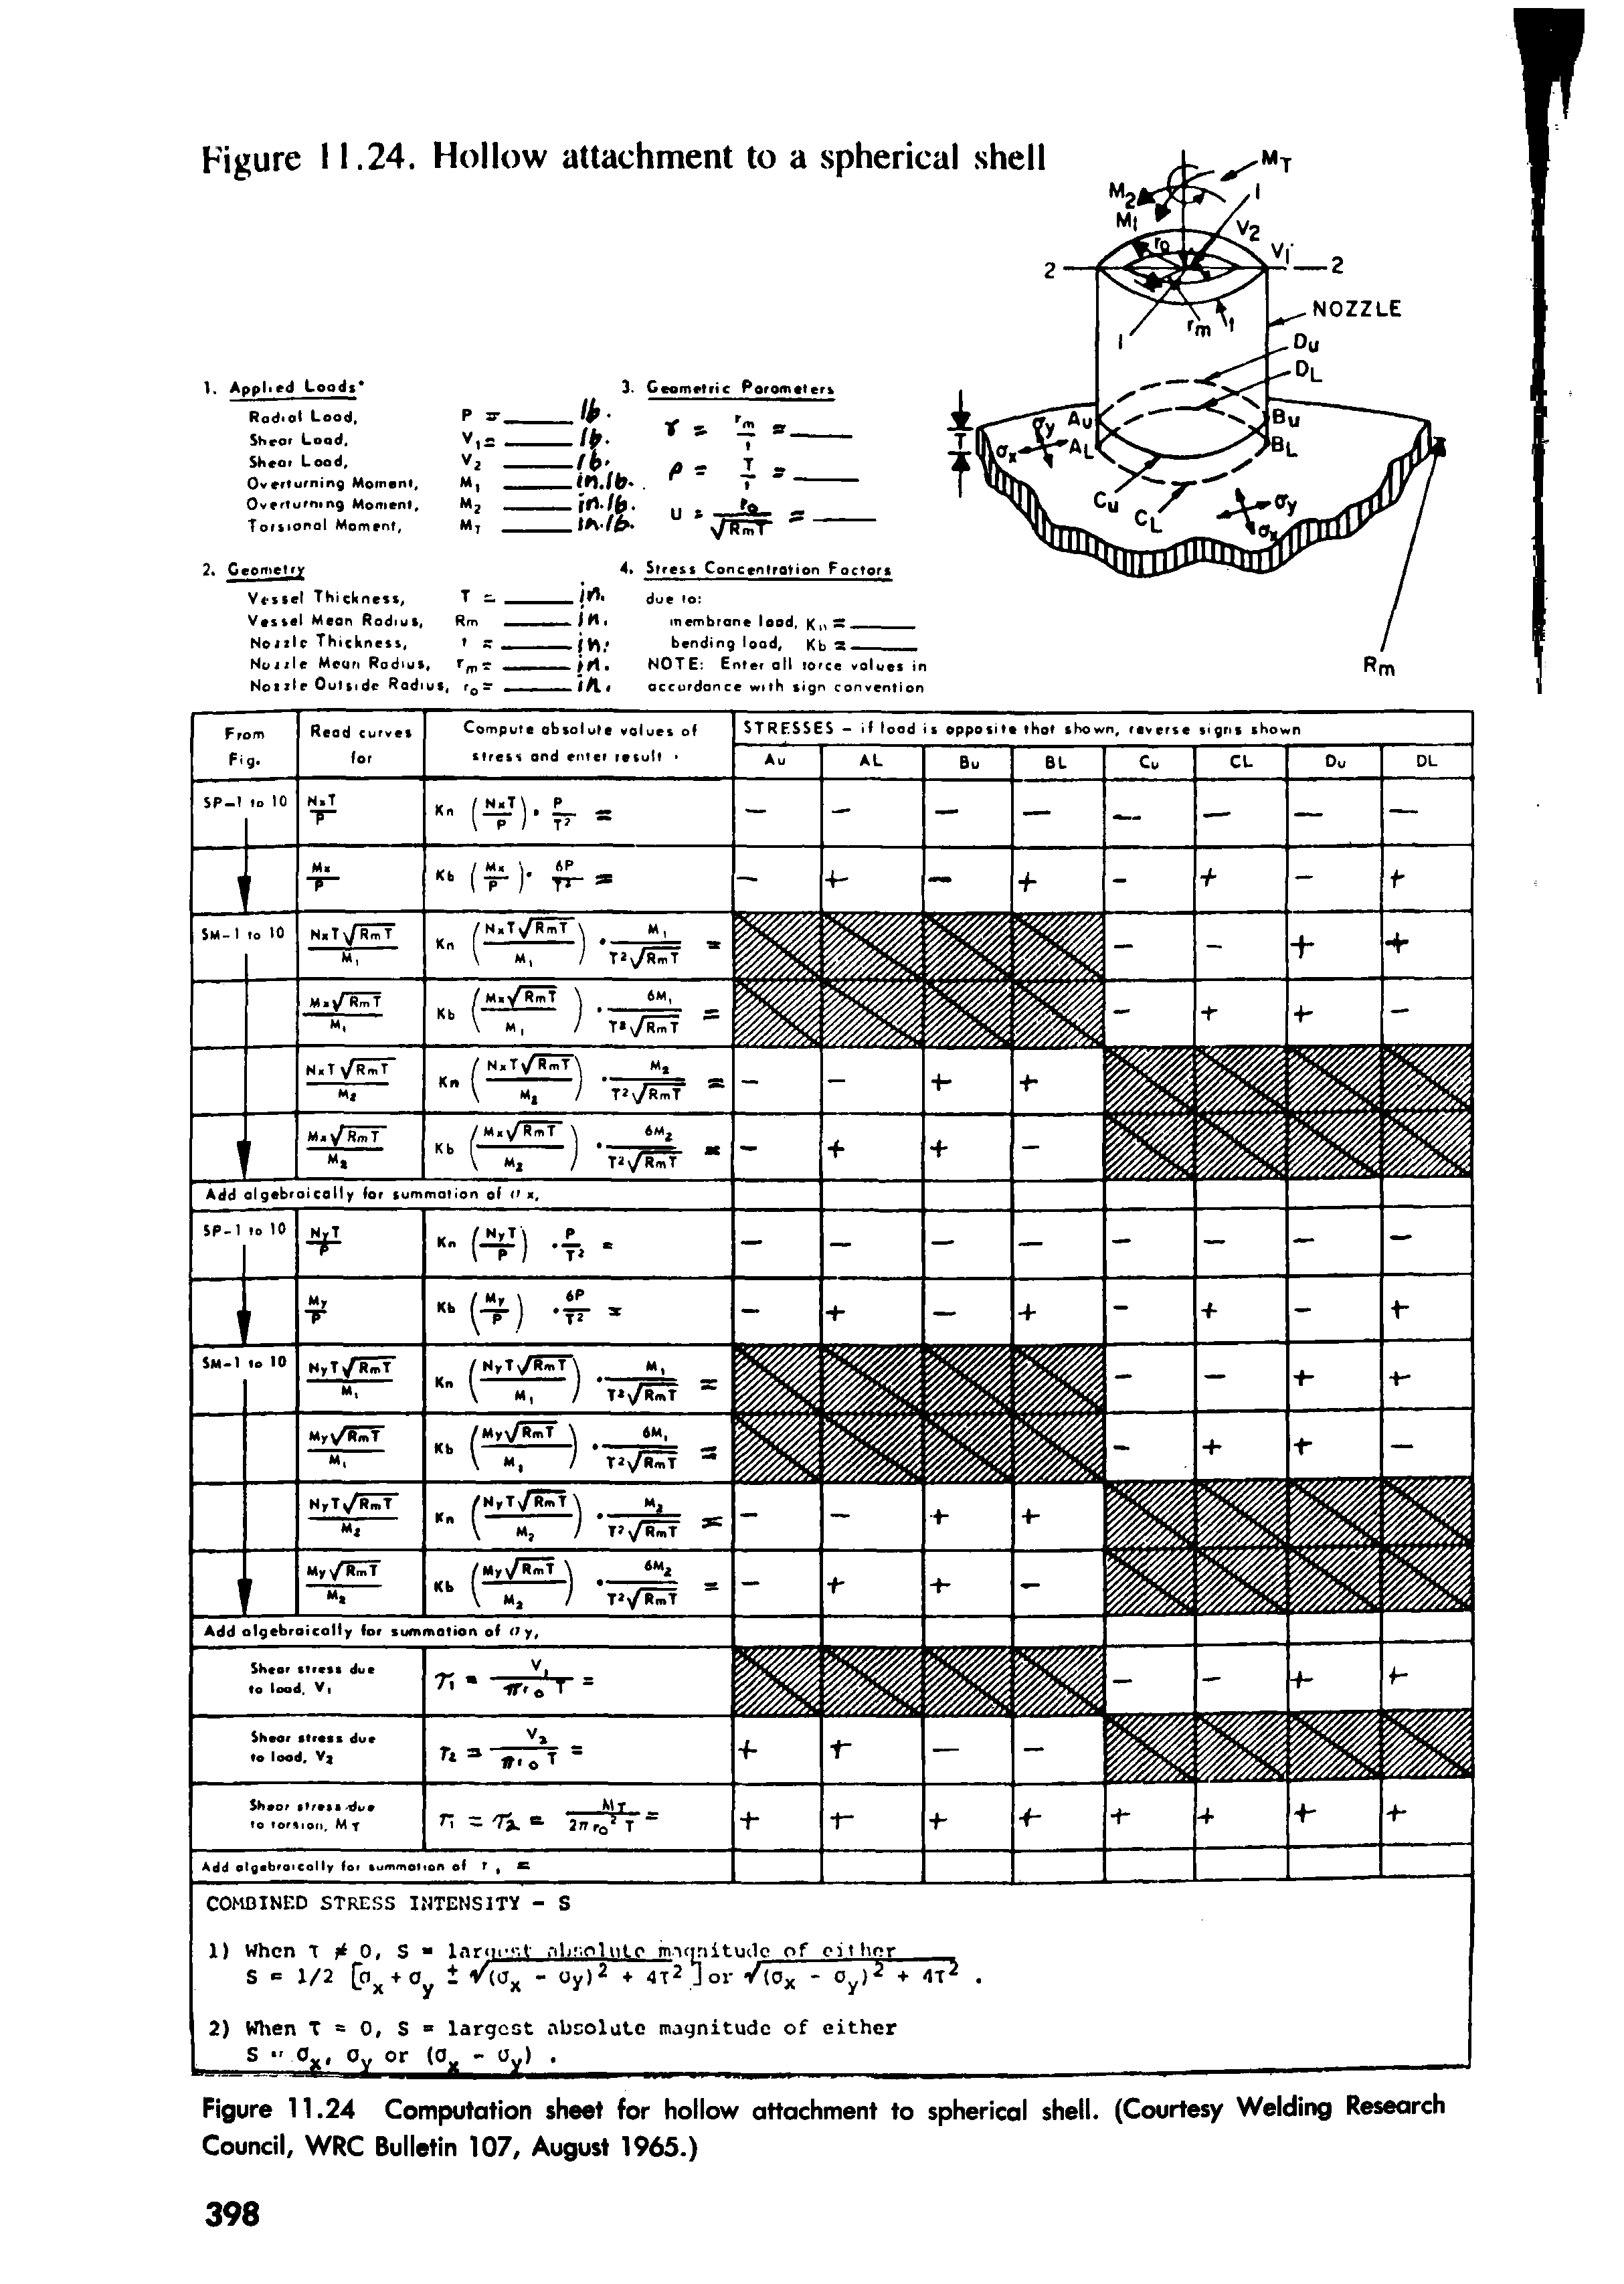 Figure 11.24 Computation sheet for hollow attachment to spherical shell. (Courtesy Welding Research Council, WRC Bulletin 107, August 1965.)...